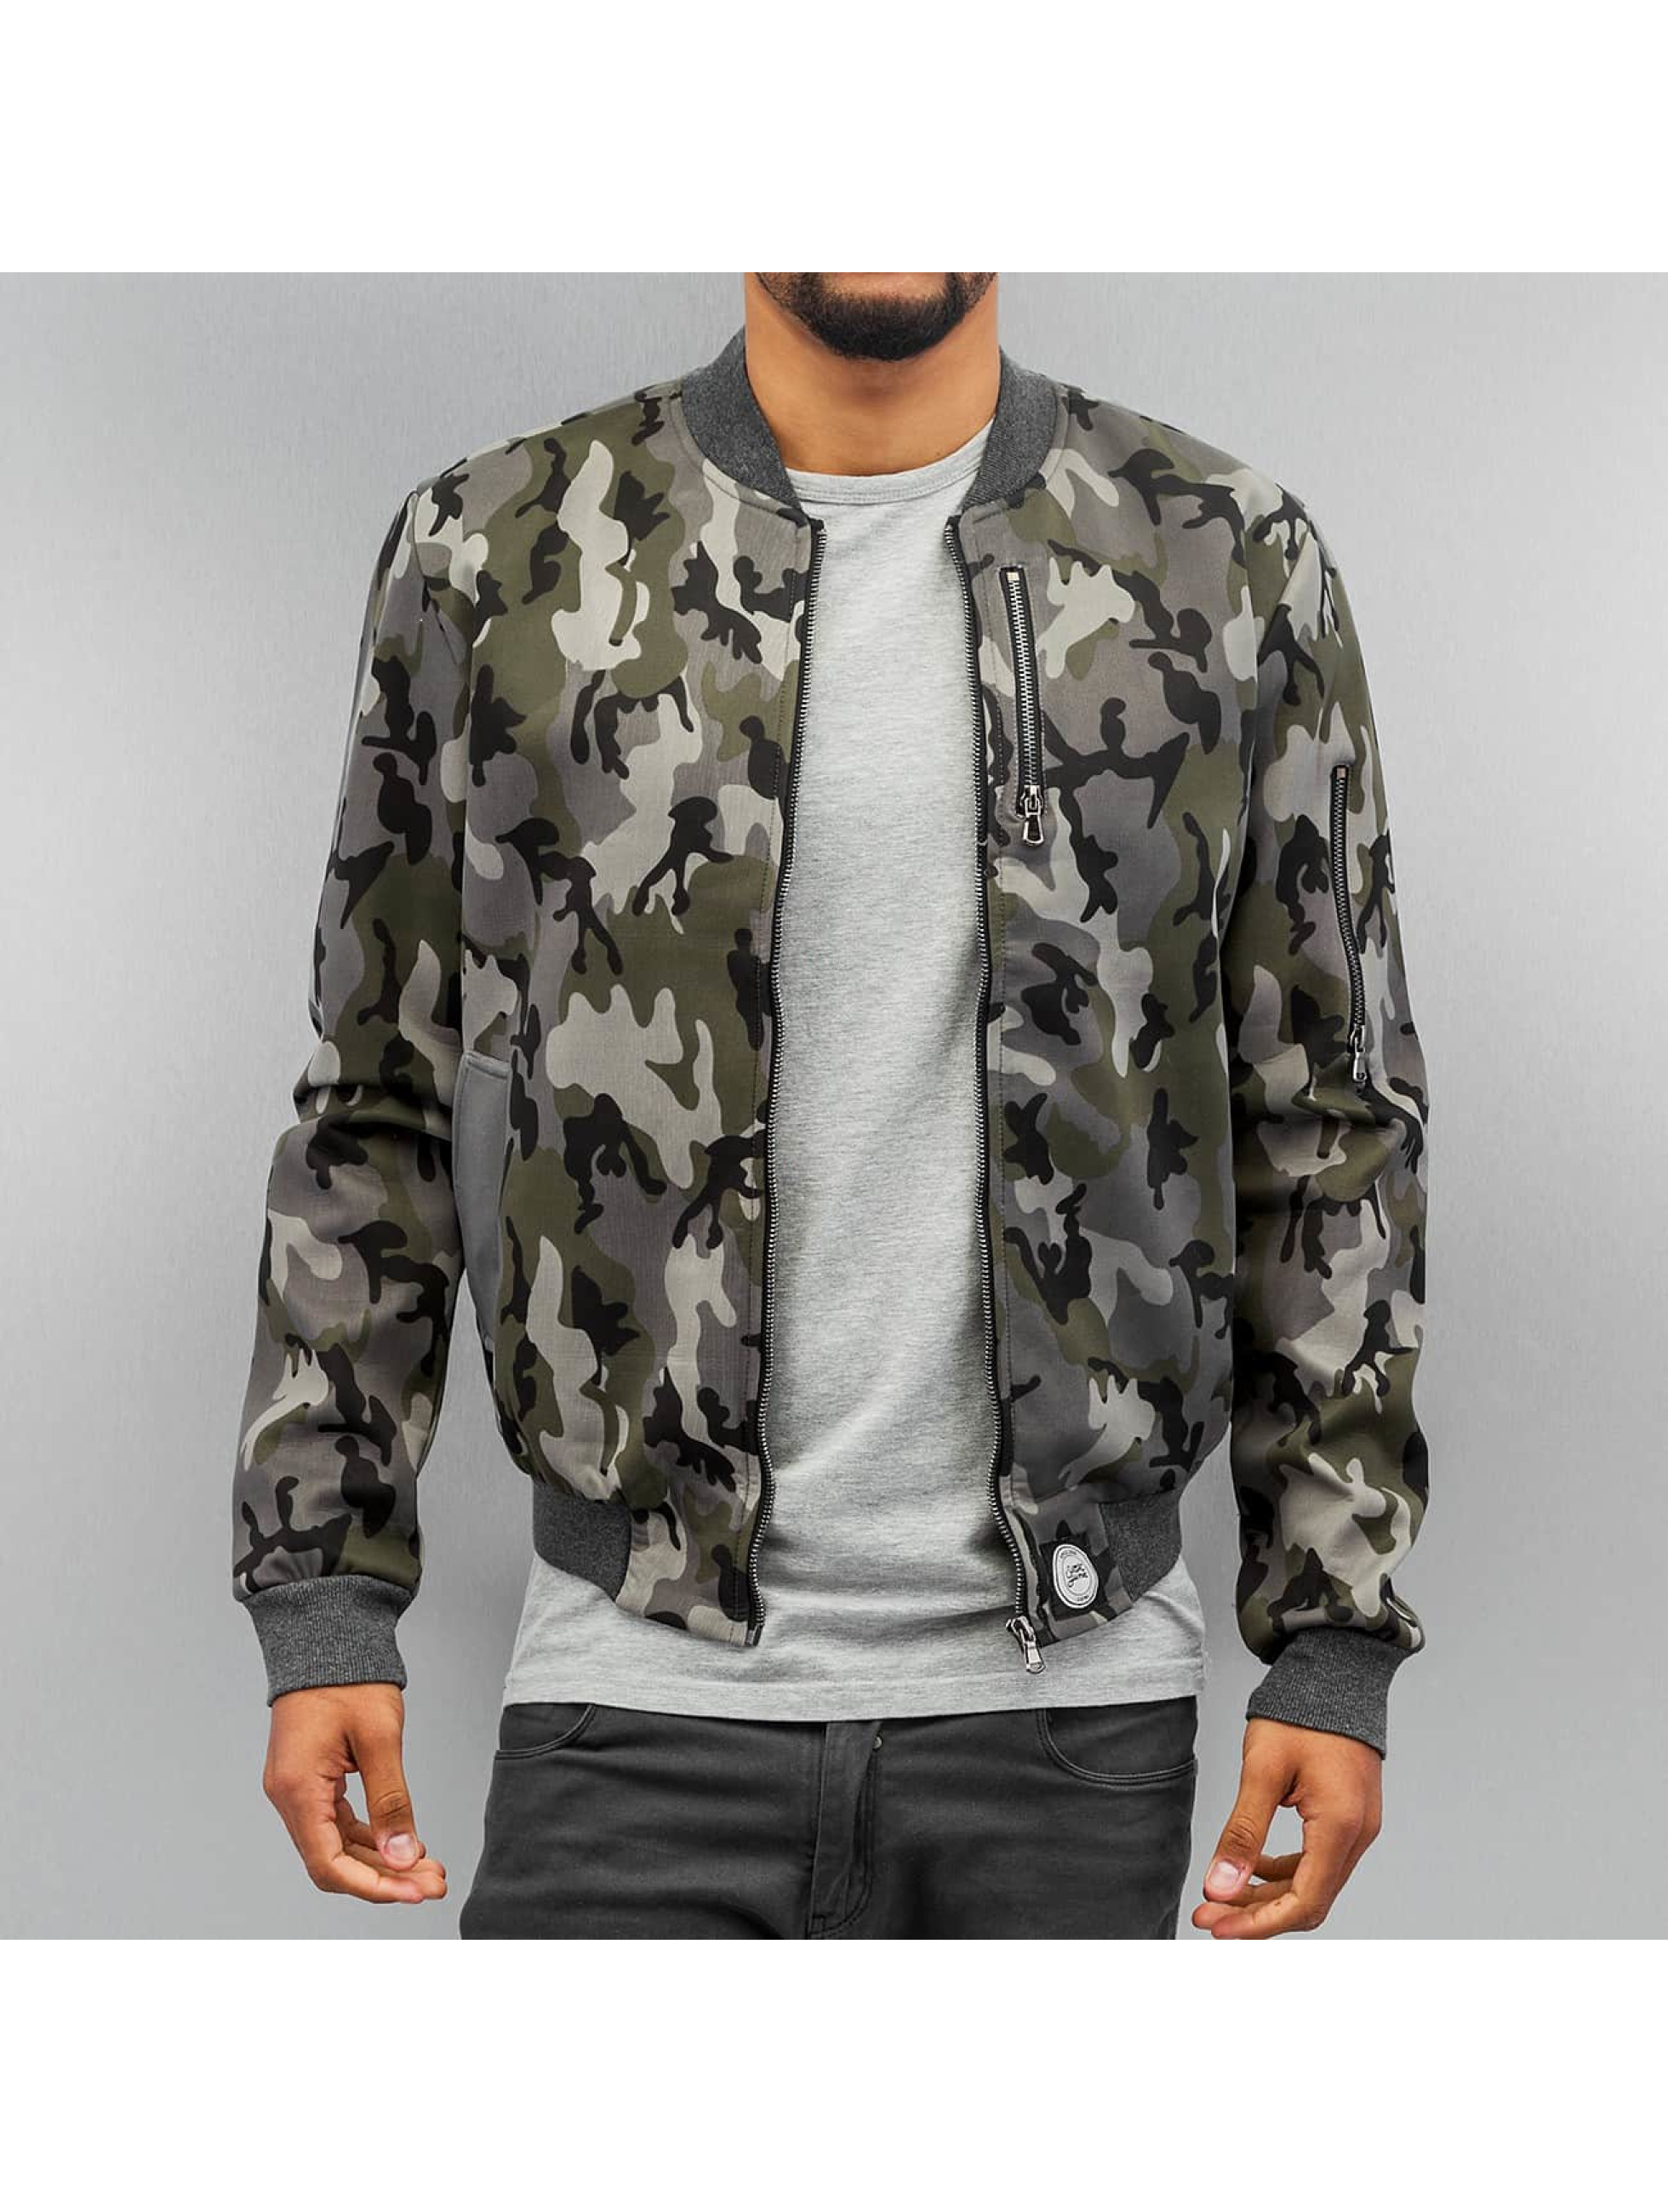 College Jacke Camou in camouflage